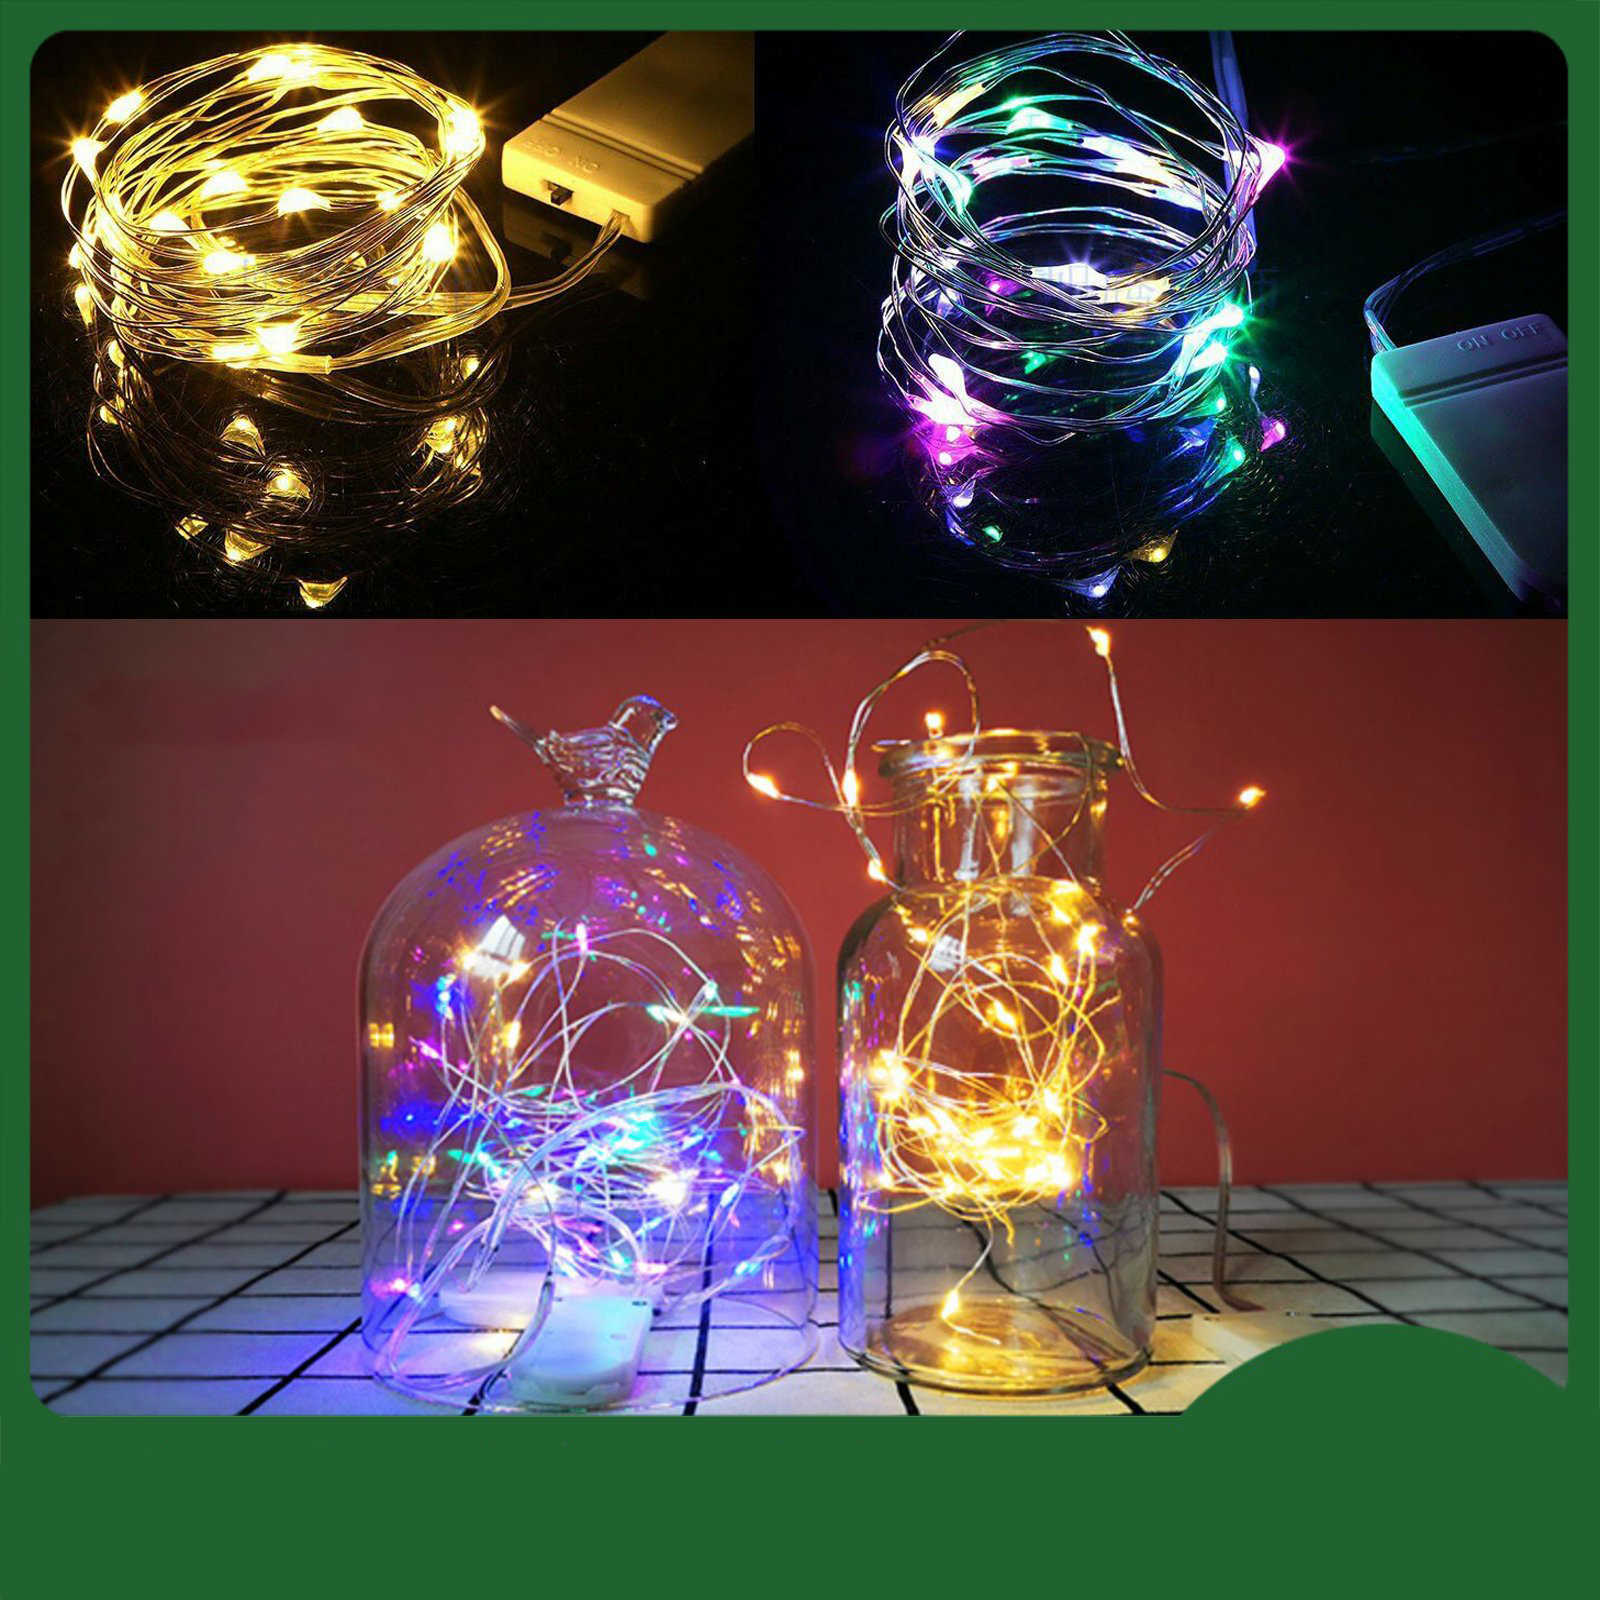 1x 1M 10 LED Battery Operated Copper Wire Mini Fairy Light String Party Decor MW